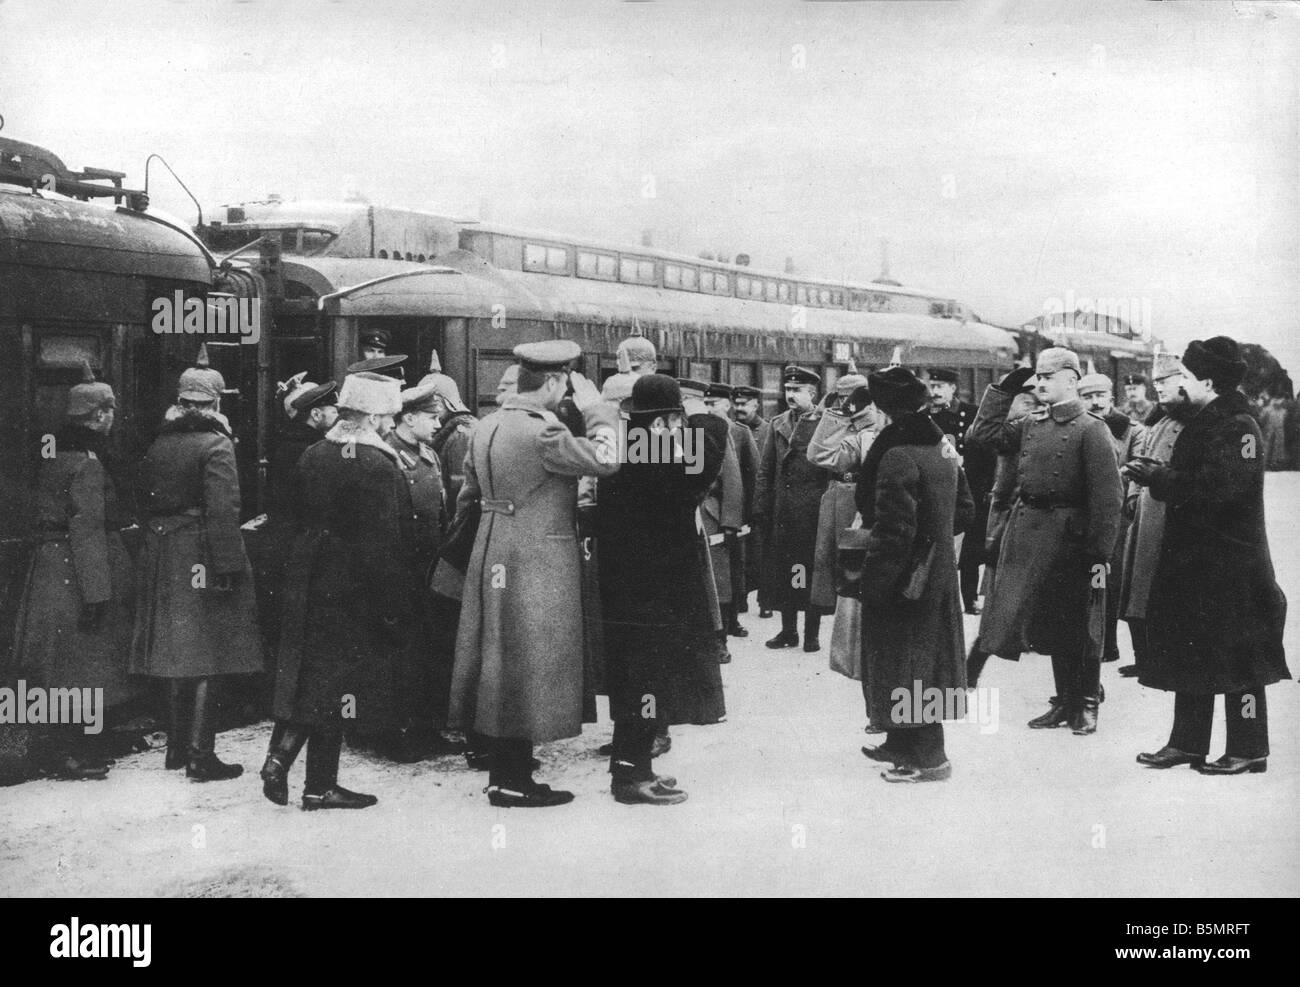 9 1917 12 15 A1 16 Brest Litowsk Arrival of Russ delegacy World War 1 1914 18 Russian German armistice of Brest Litowsk 15th Dec Stock Photo